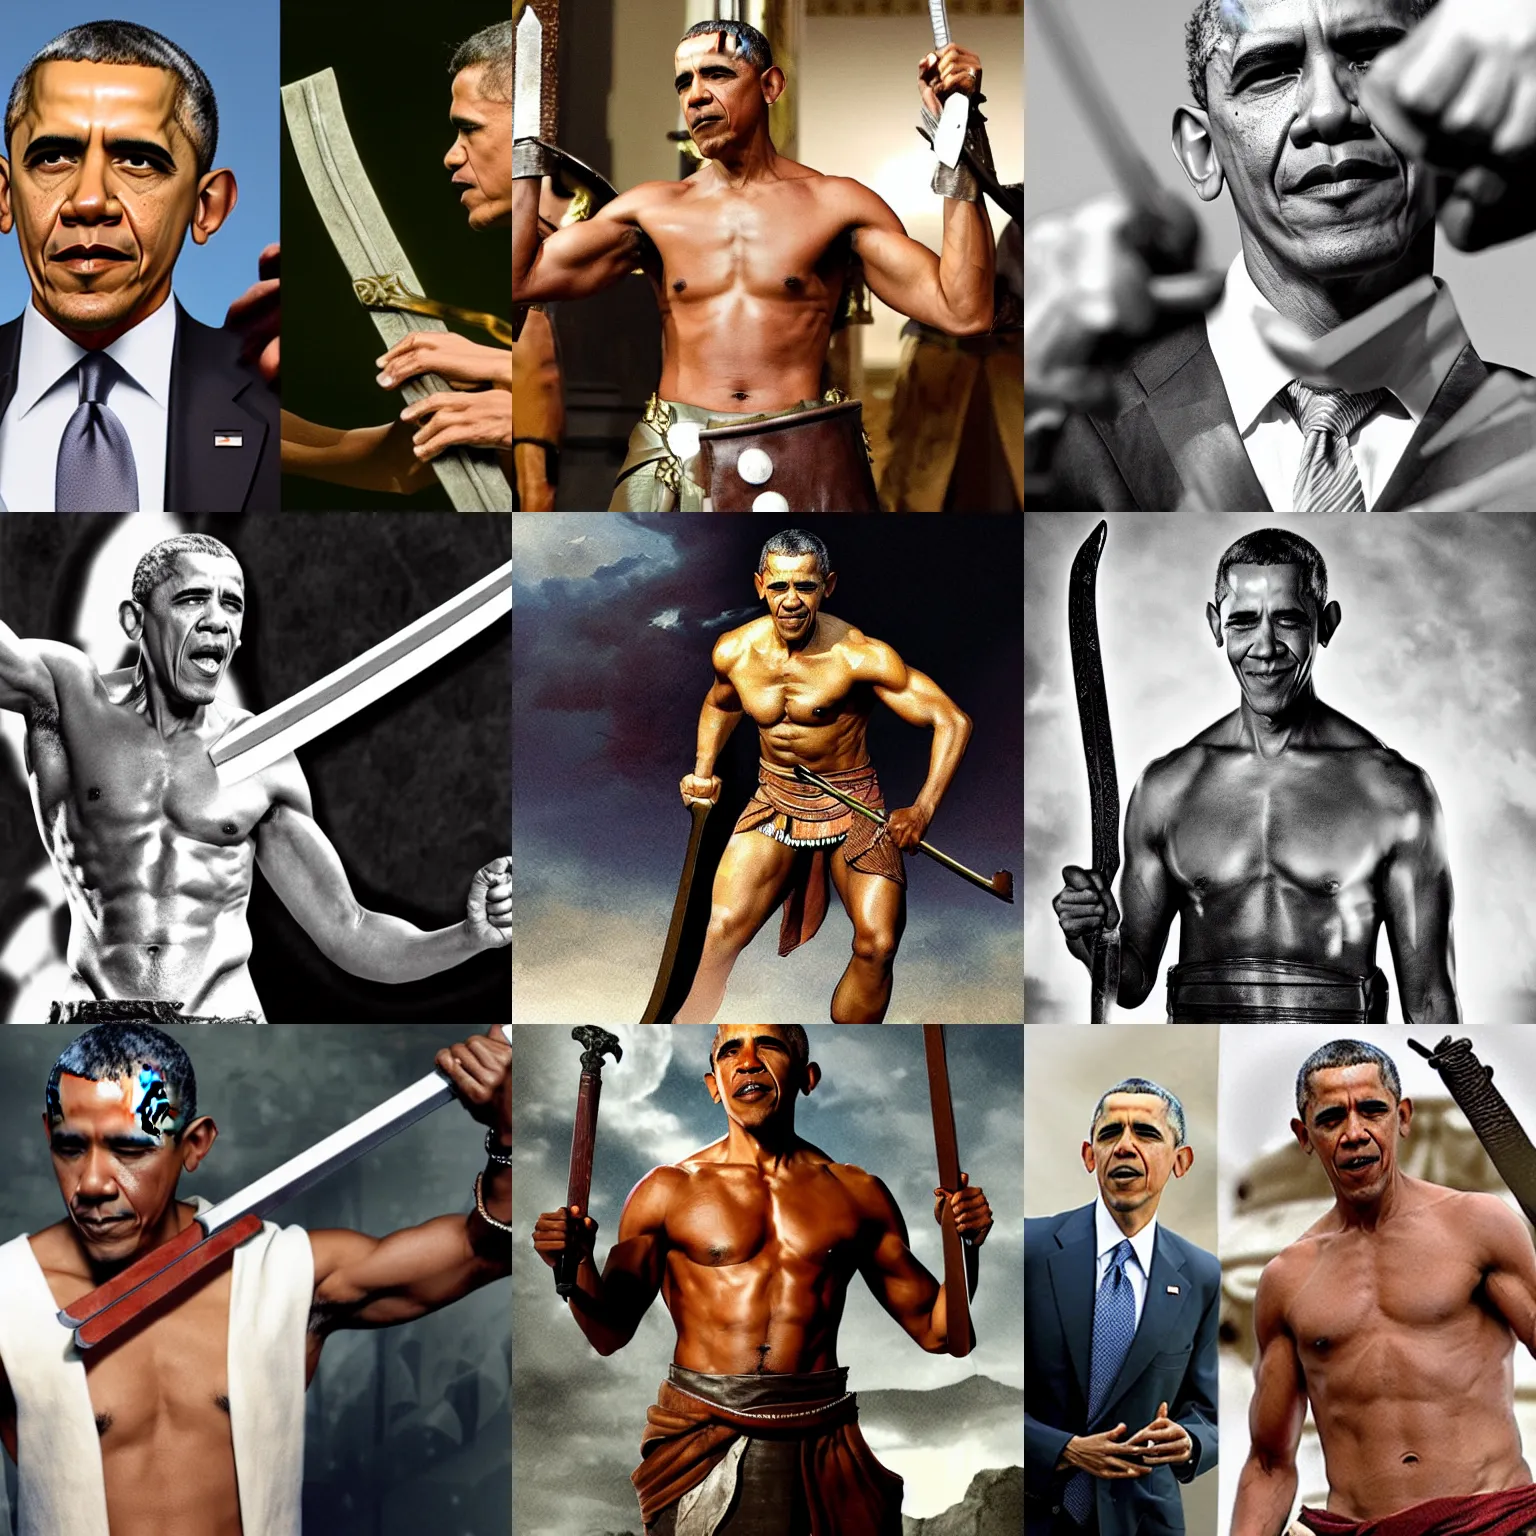 Prompt: obama as a character from spartacus, muscular chest, wielding sword and shield